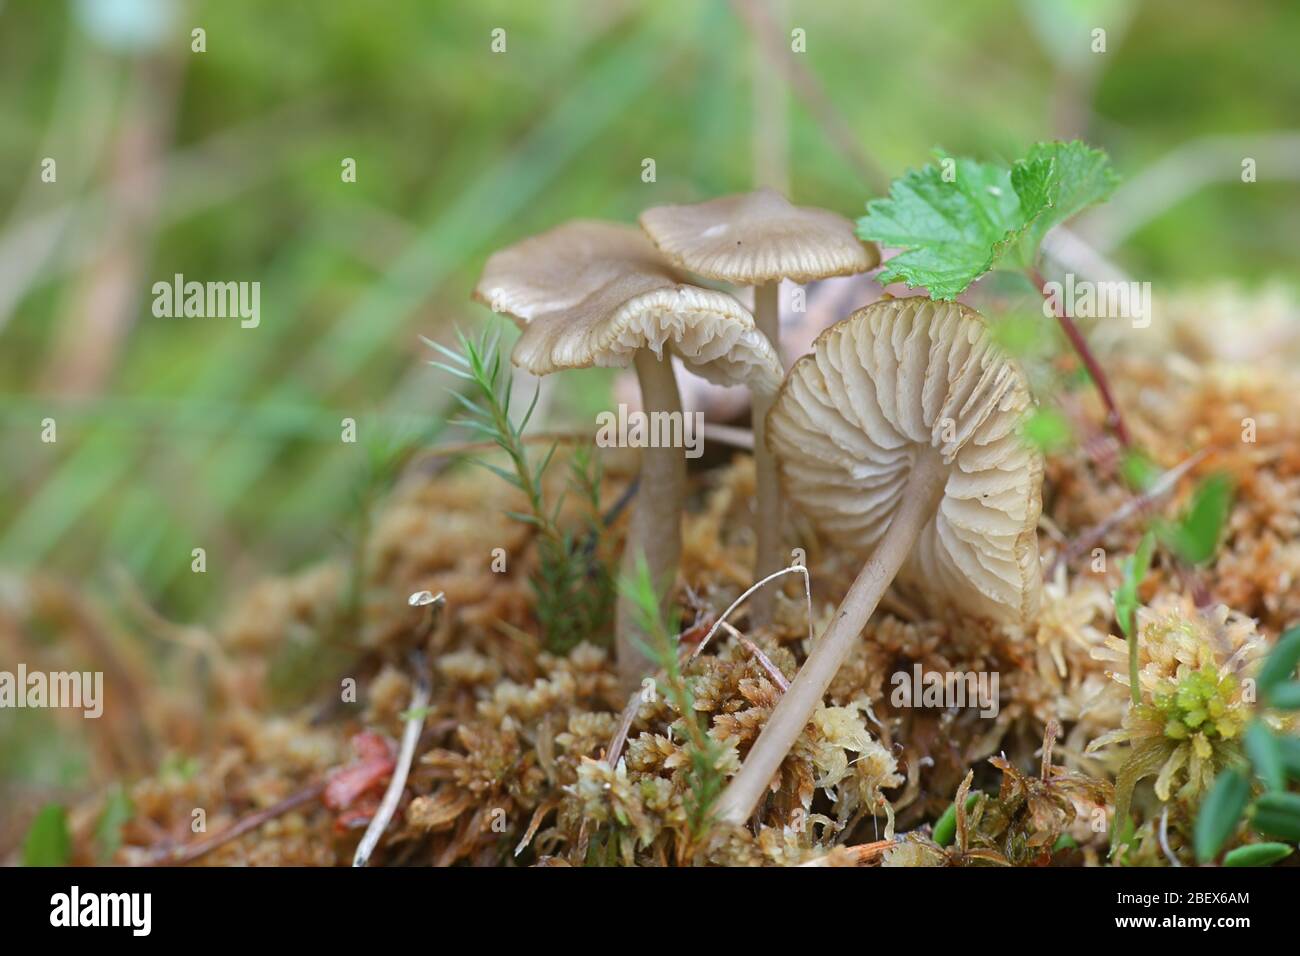 Sphagnurus paluster, commonly called the Sphagnum Greyling, parasitic on peat moss Stock Photo